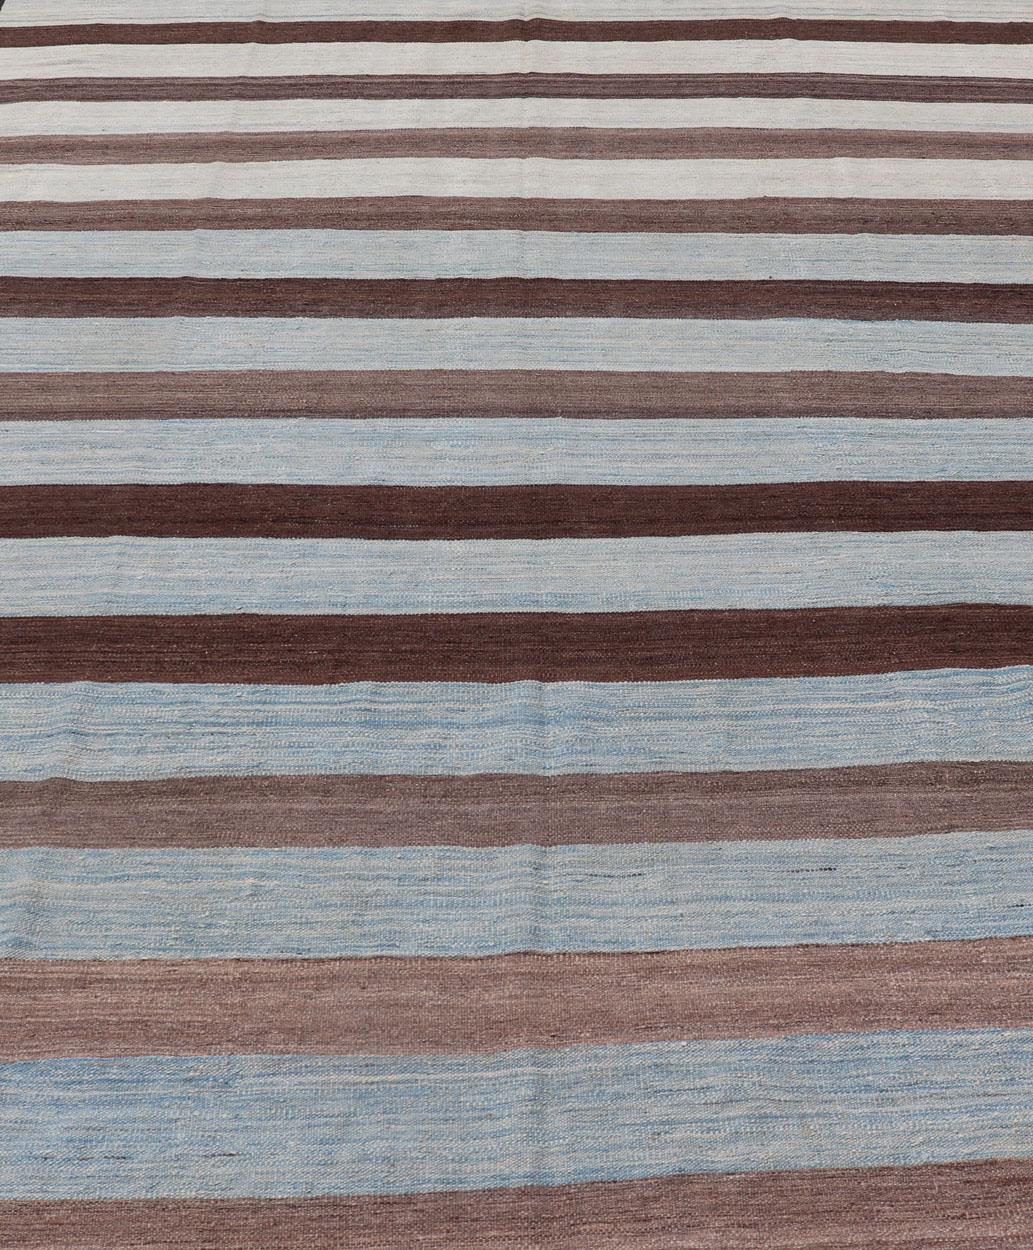 Contemporary Modern Kilim Hand Woven Casual Rug with Stripes in Shades of Blue and Brown For Sale